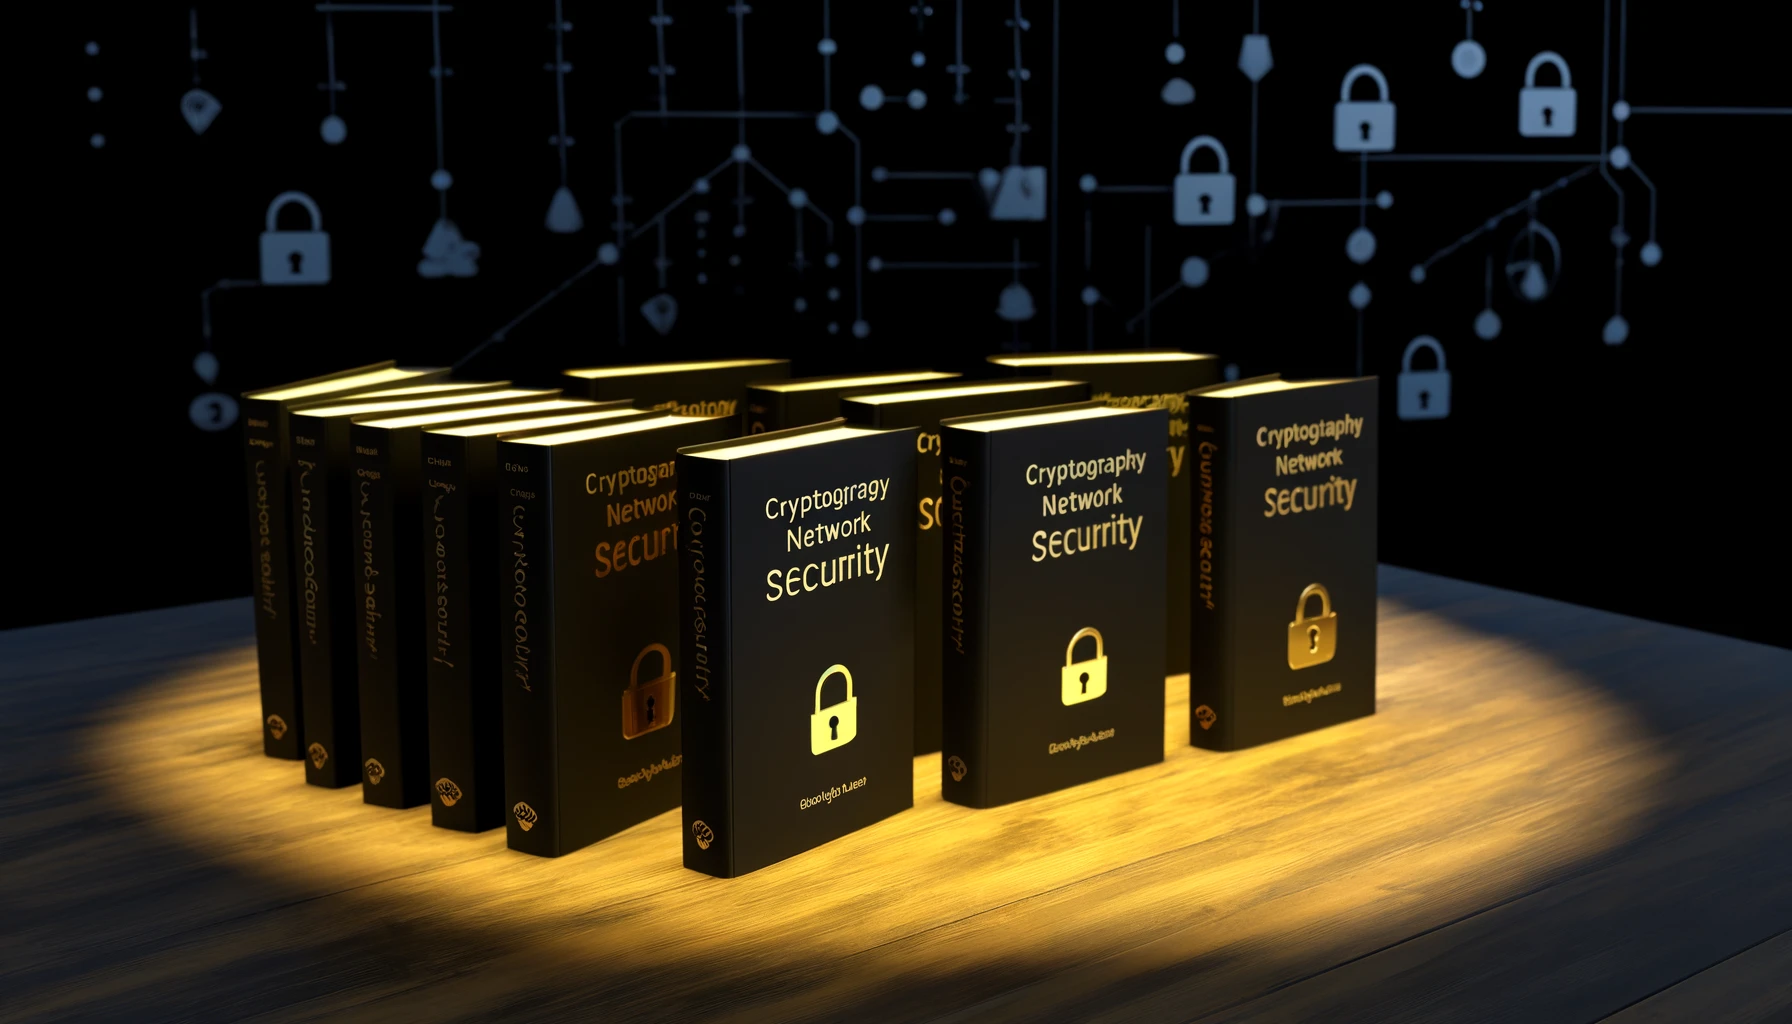 Top Picks - A Guide to The Best Network Security and Cryptography Books